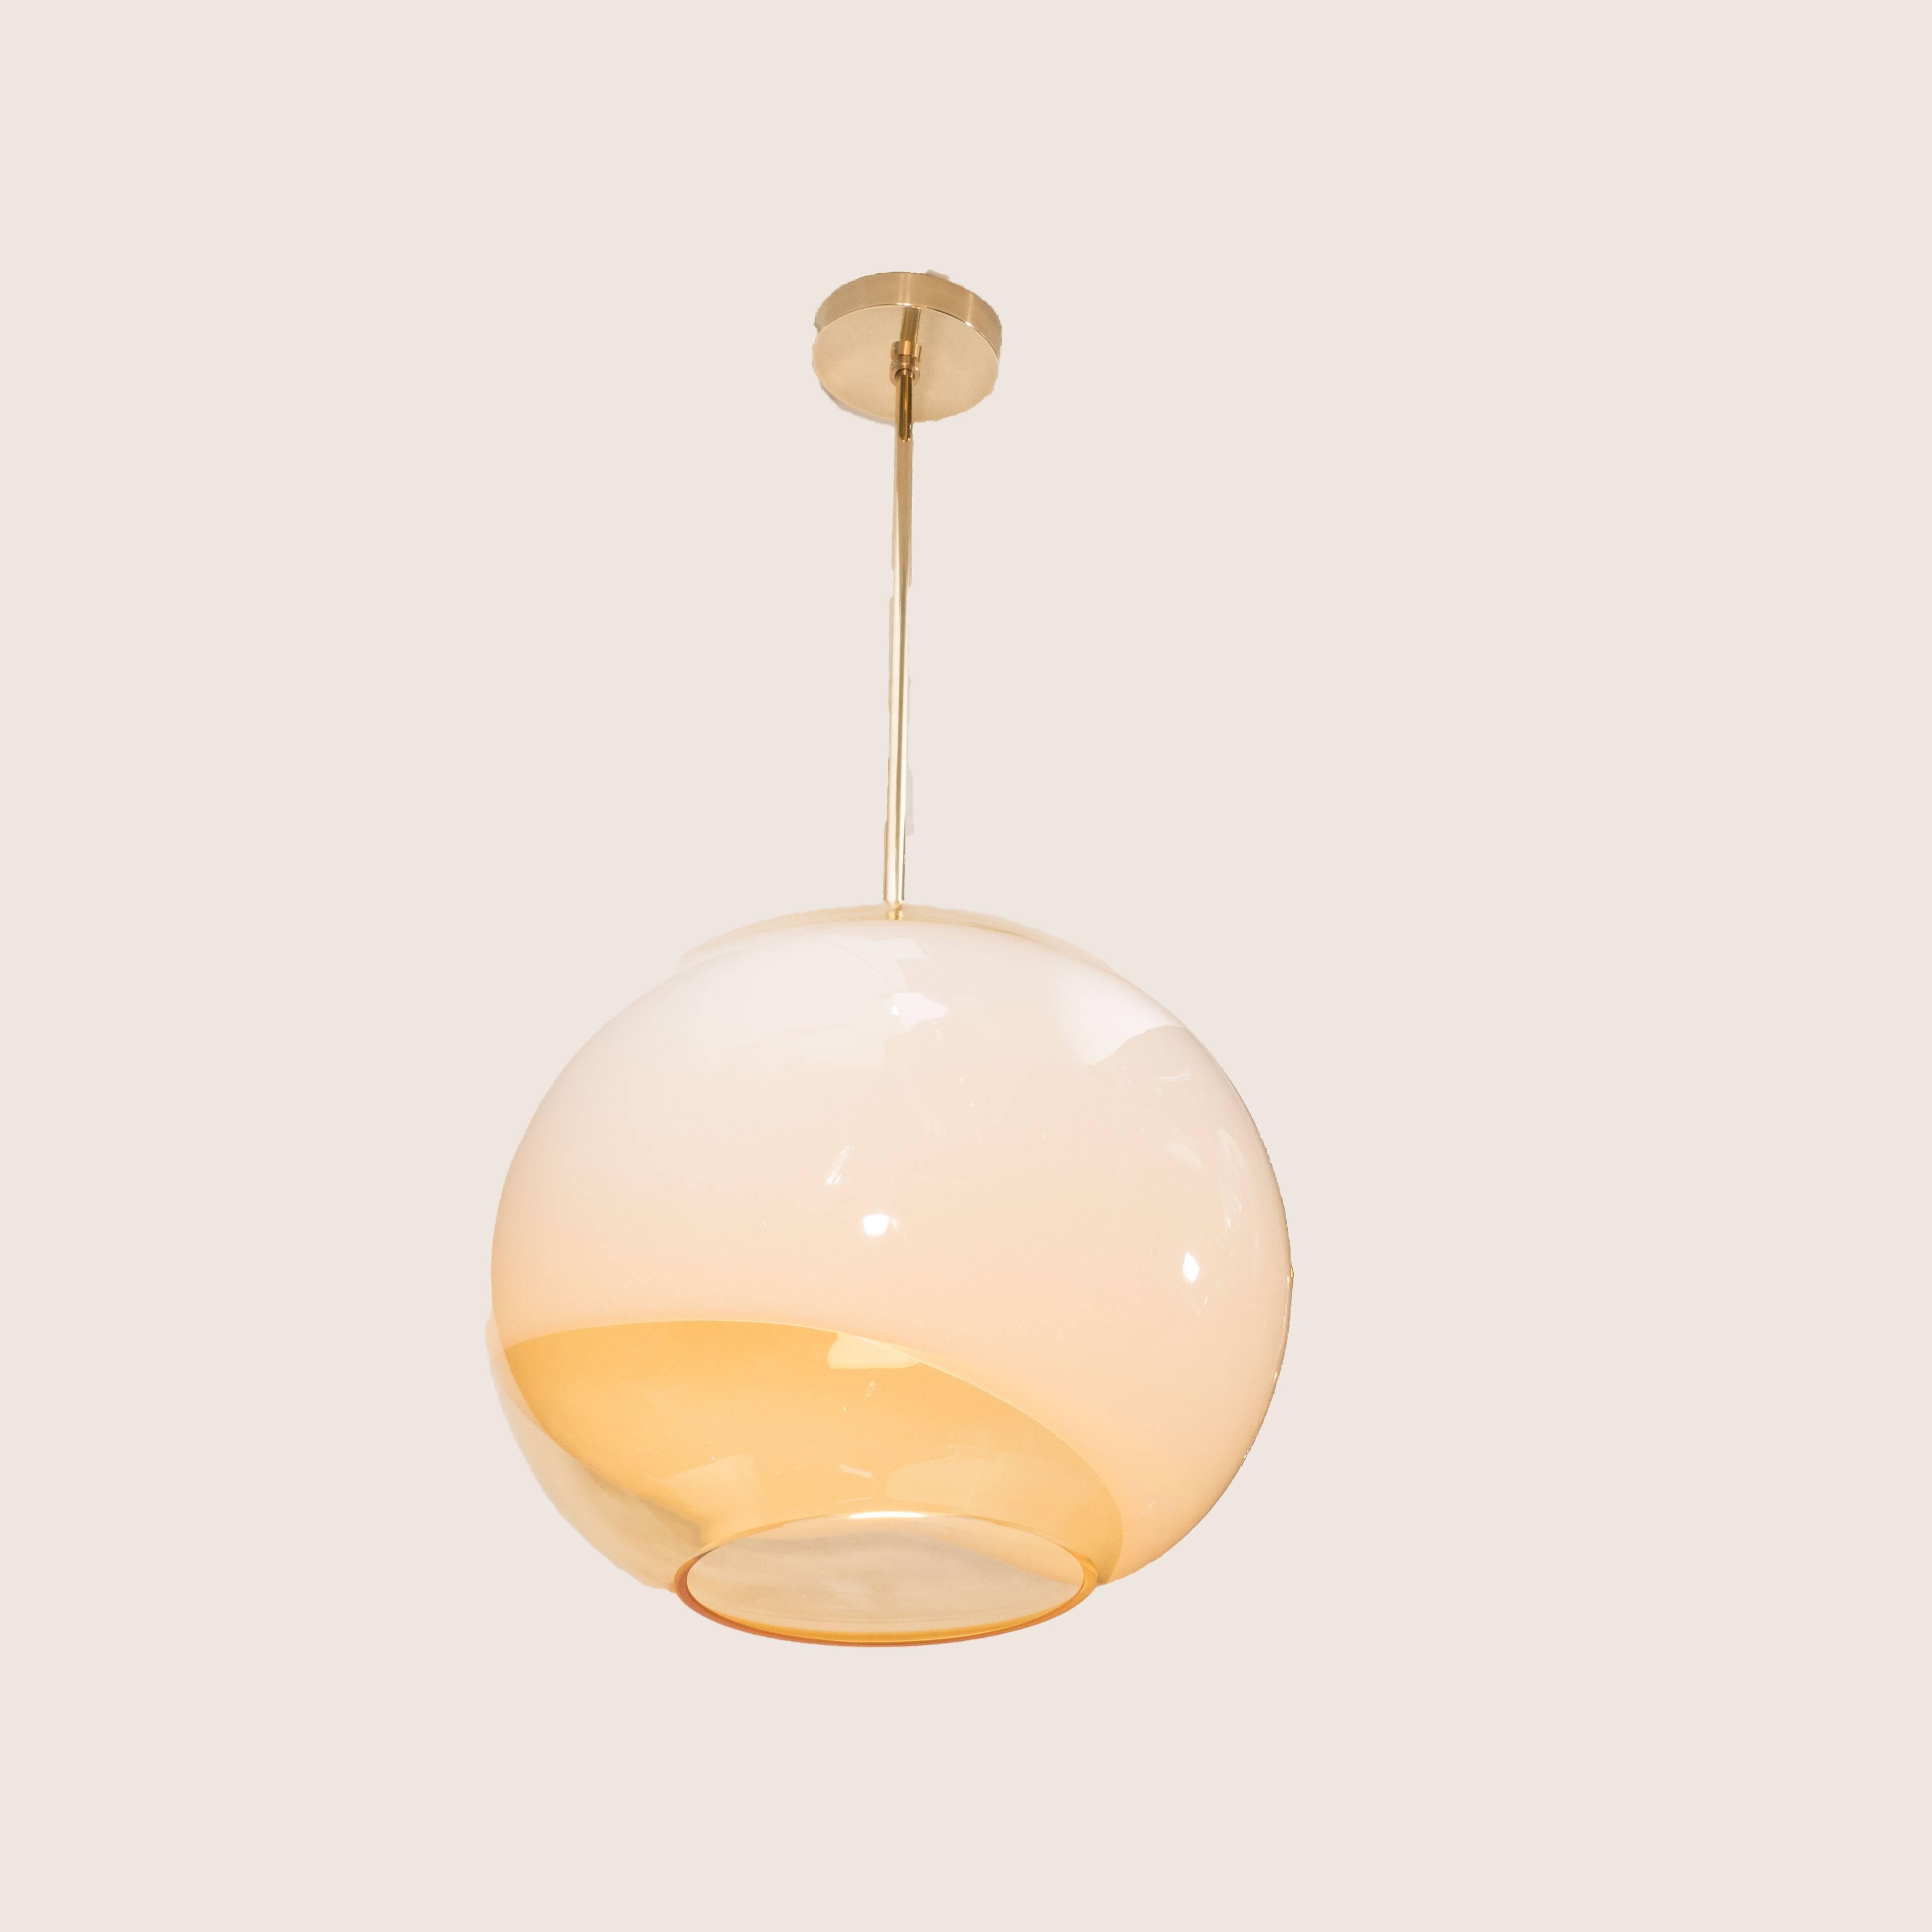 This refined pendant was realized in Italy, circa 1970. It offers an orbital form with a circular aperture at its bottom and a concave opening at top. Composed of translucent glass in a subtle amber hue, it is infused with a sinuous band in opaque